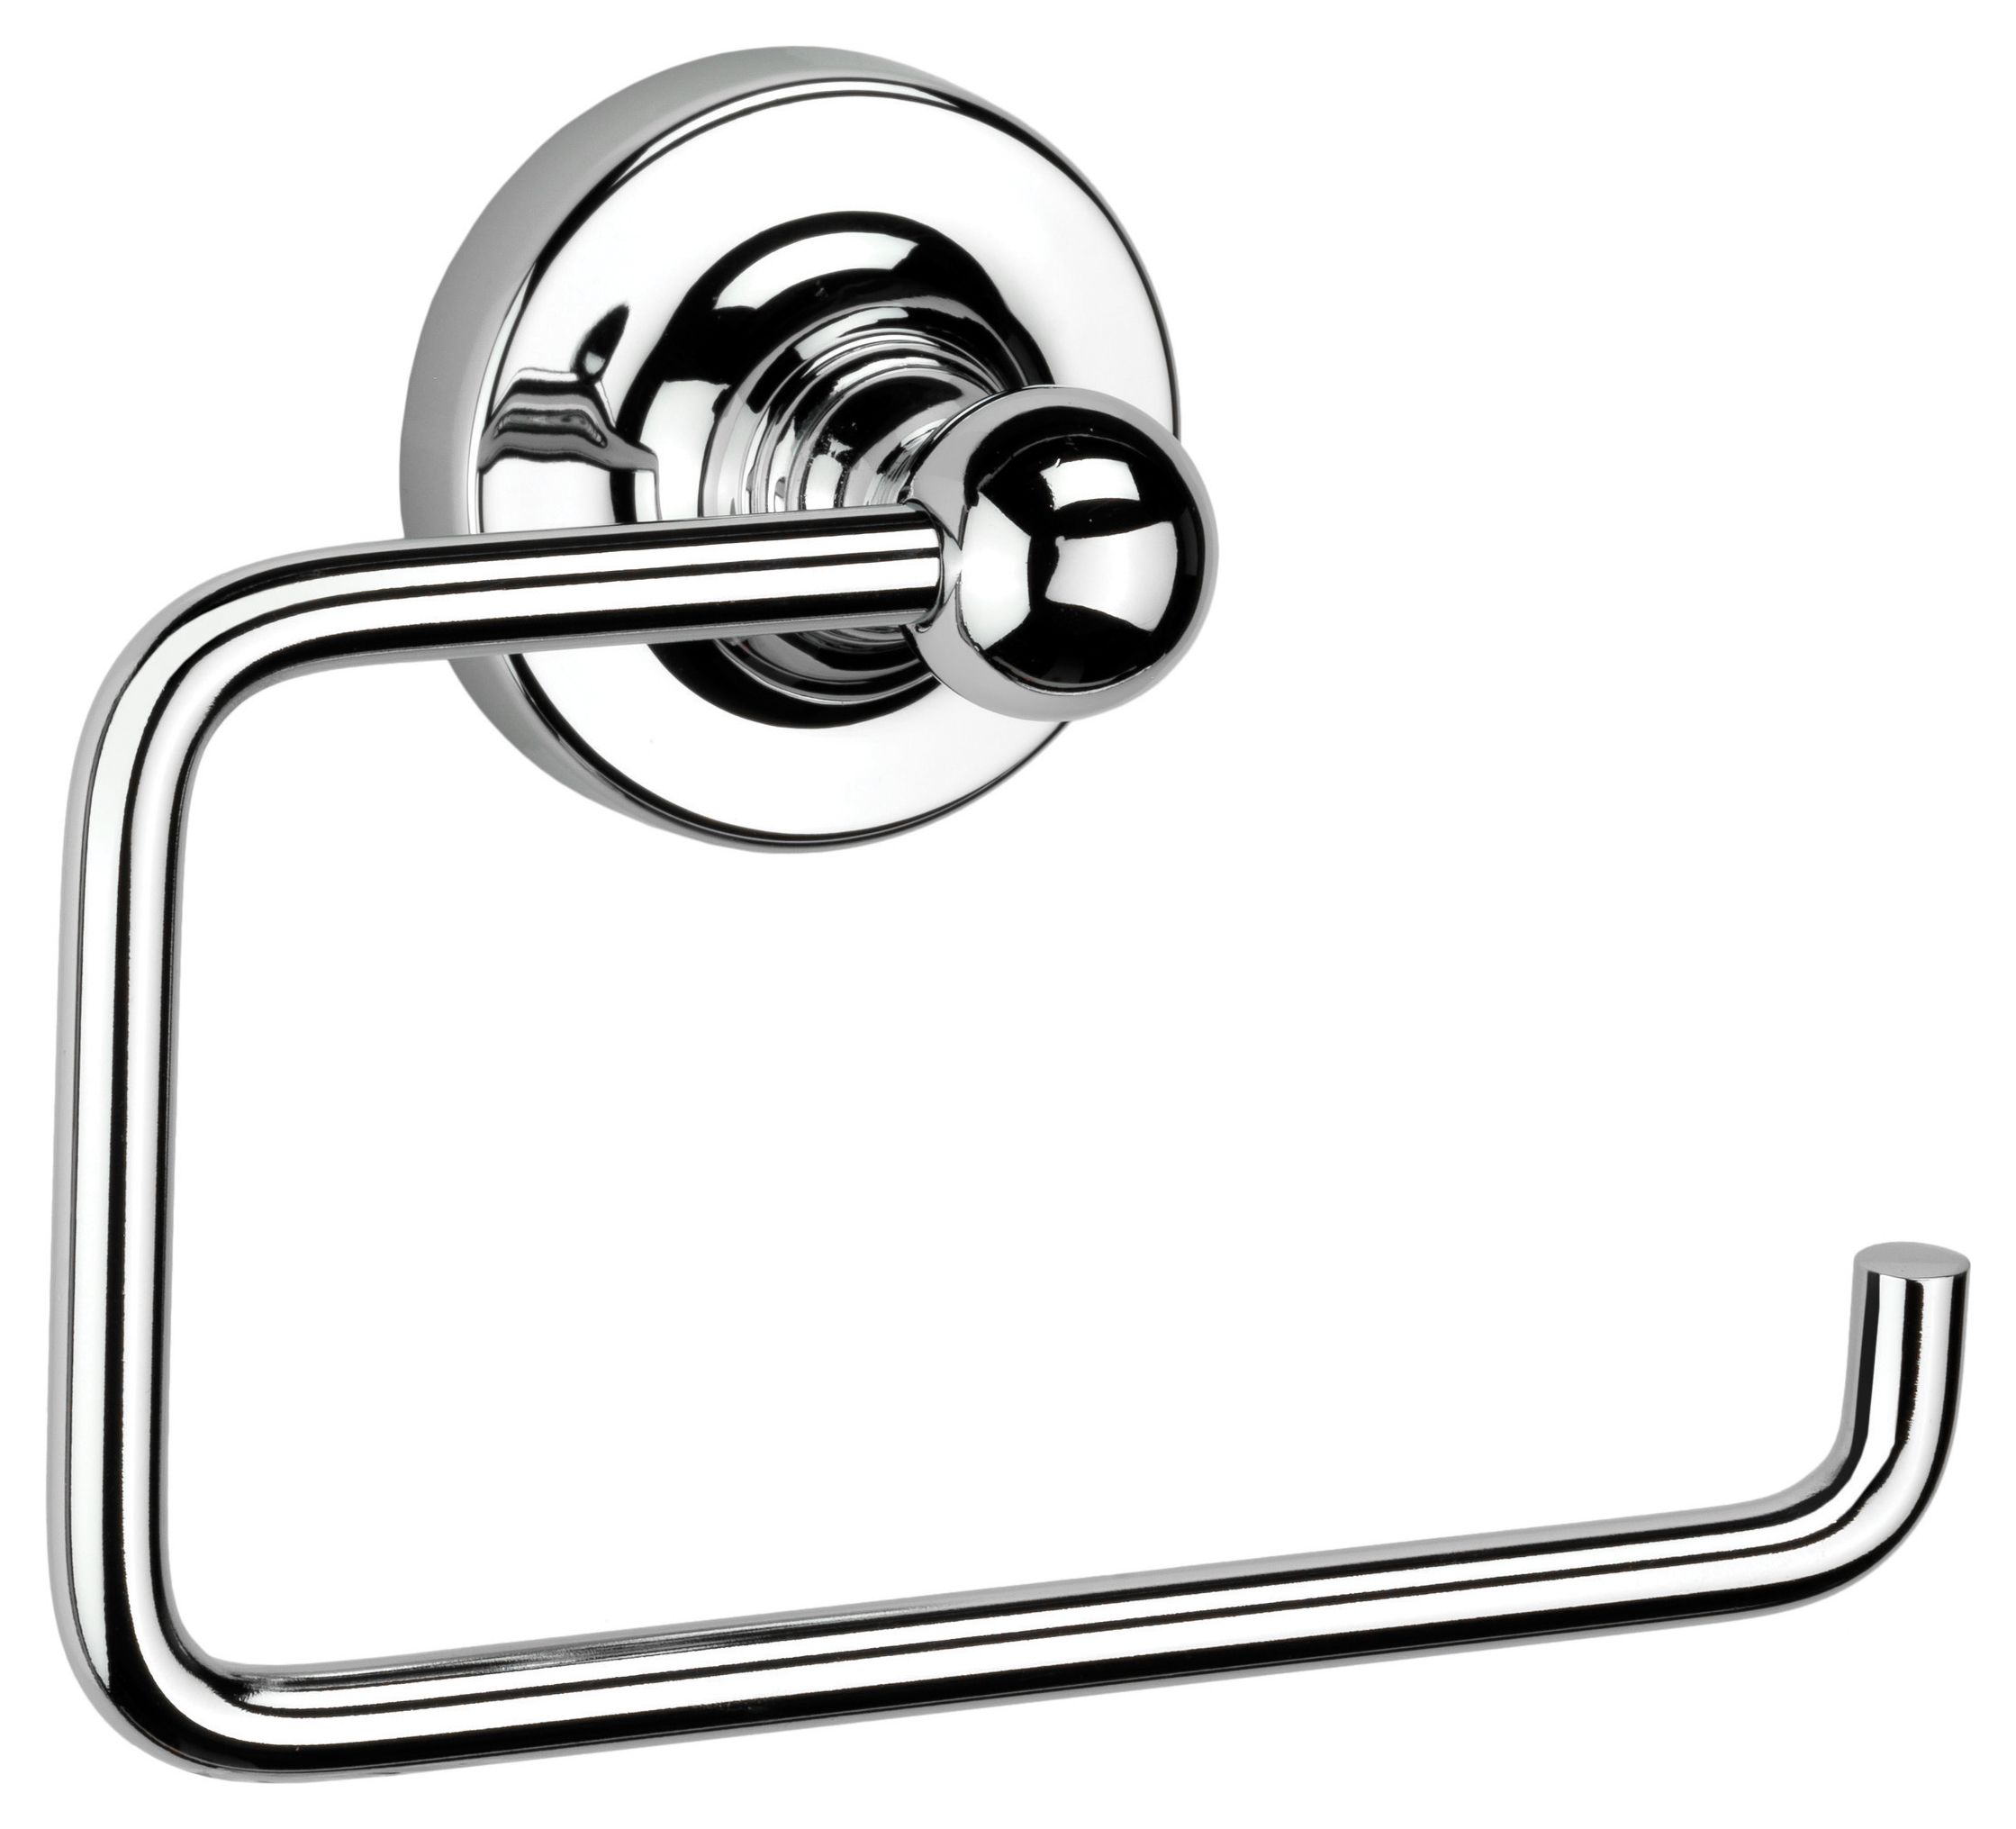 Image of Croydex Worcester Flexi-Fix™ Toilet Roll Holder - Chrome